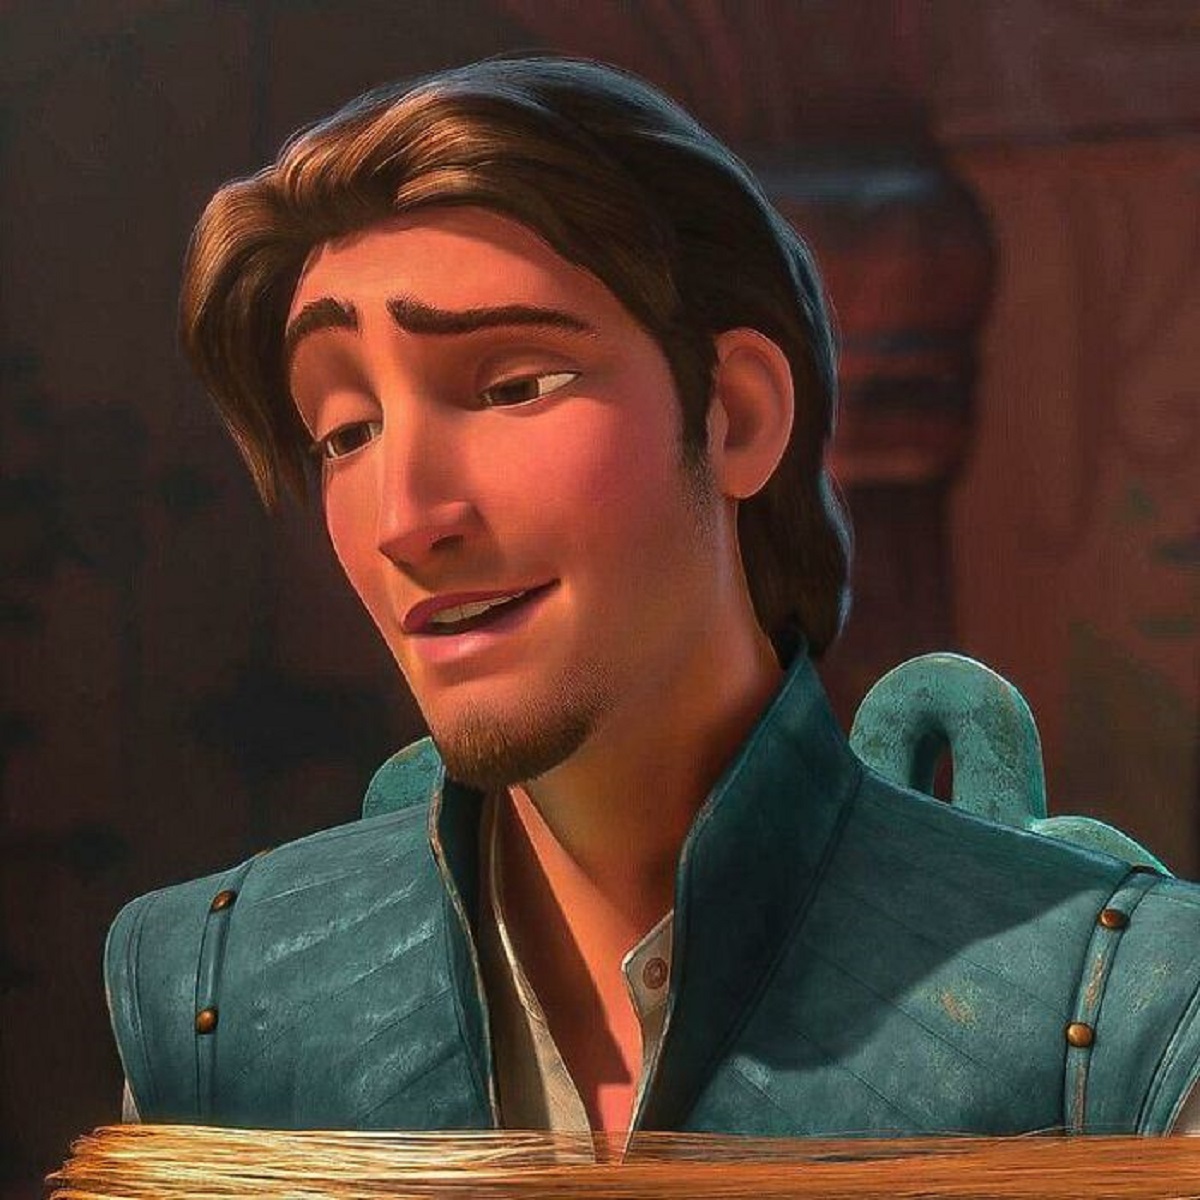 The directors of Tangled held a “hot man meeting” and had all the women from the studio critique Hollywood men to create the character of Flynn Rider.